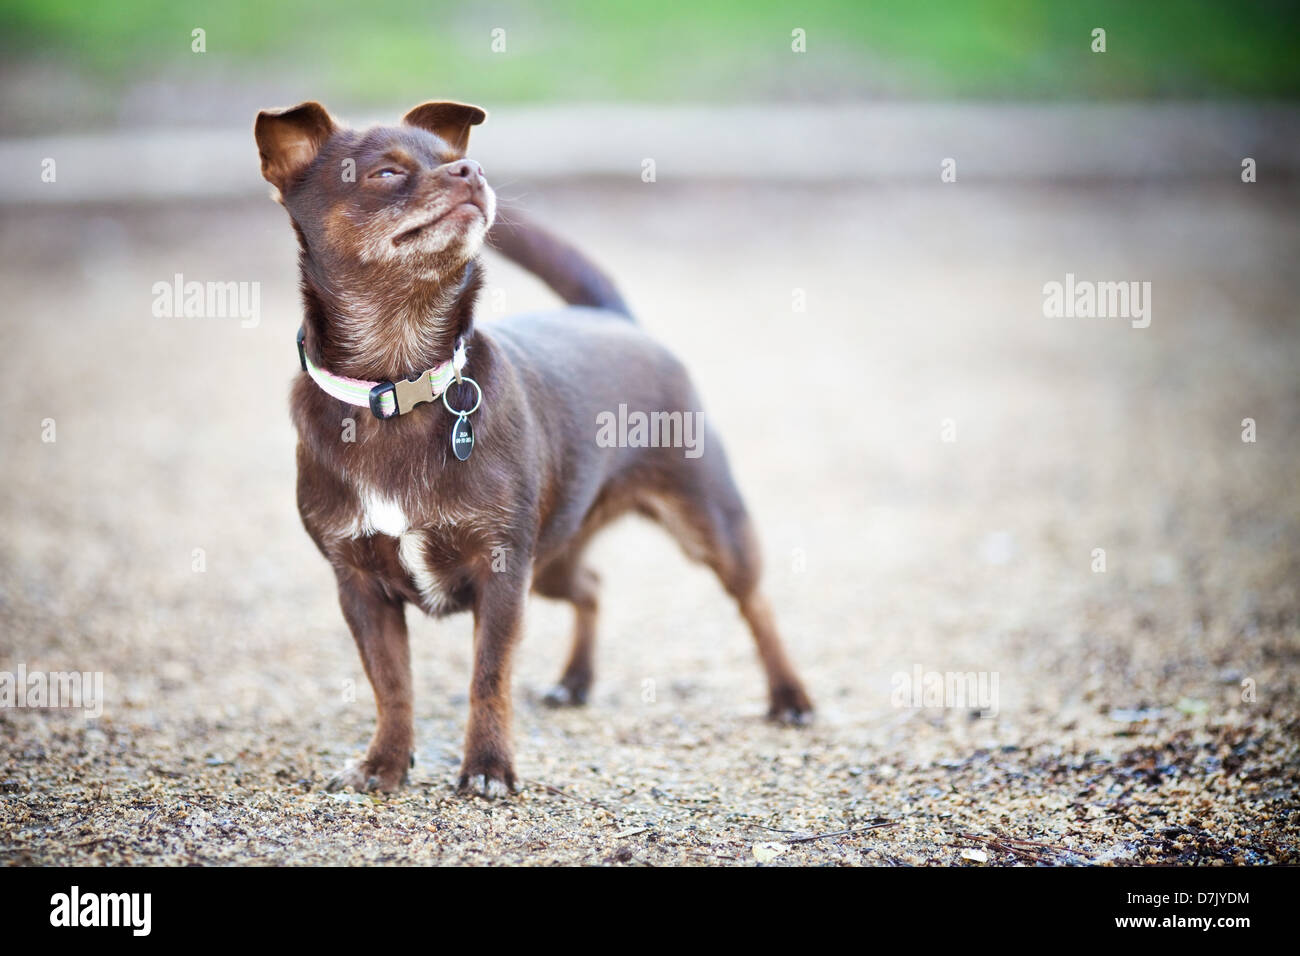 Brown chihuahua dog outdoors looking up Banque D'Images